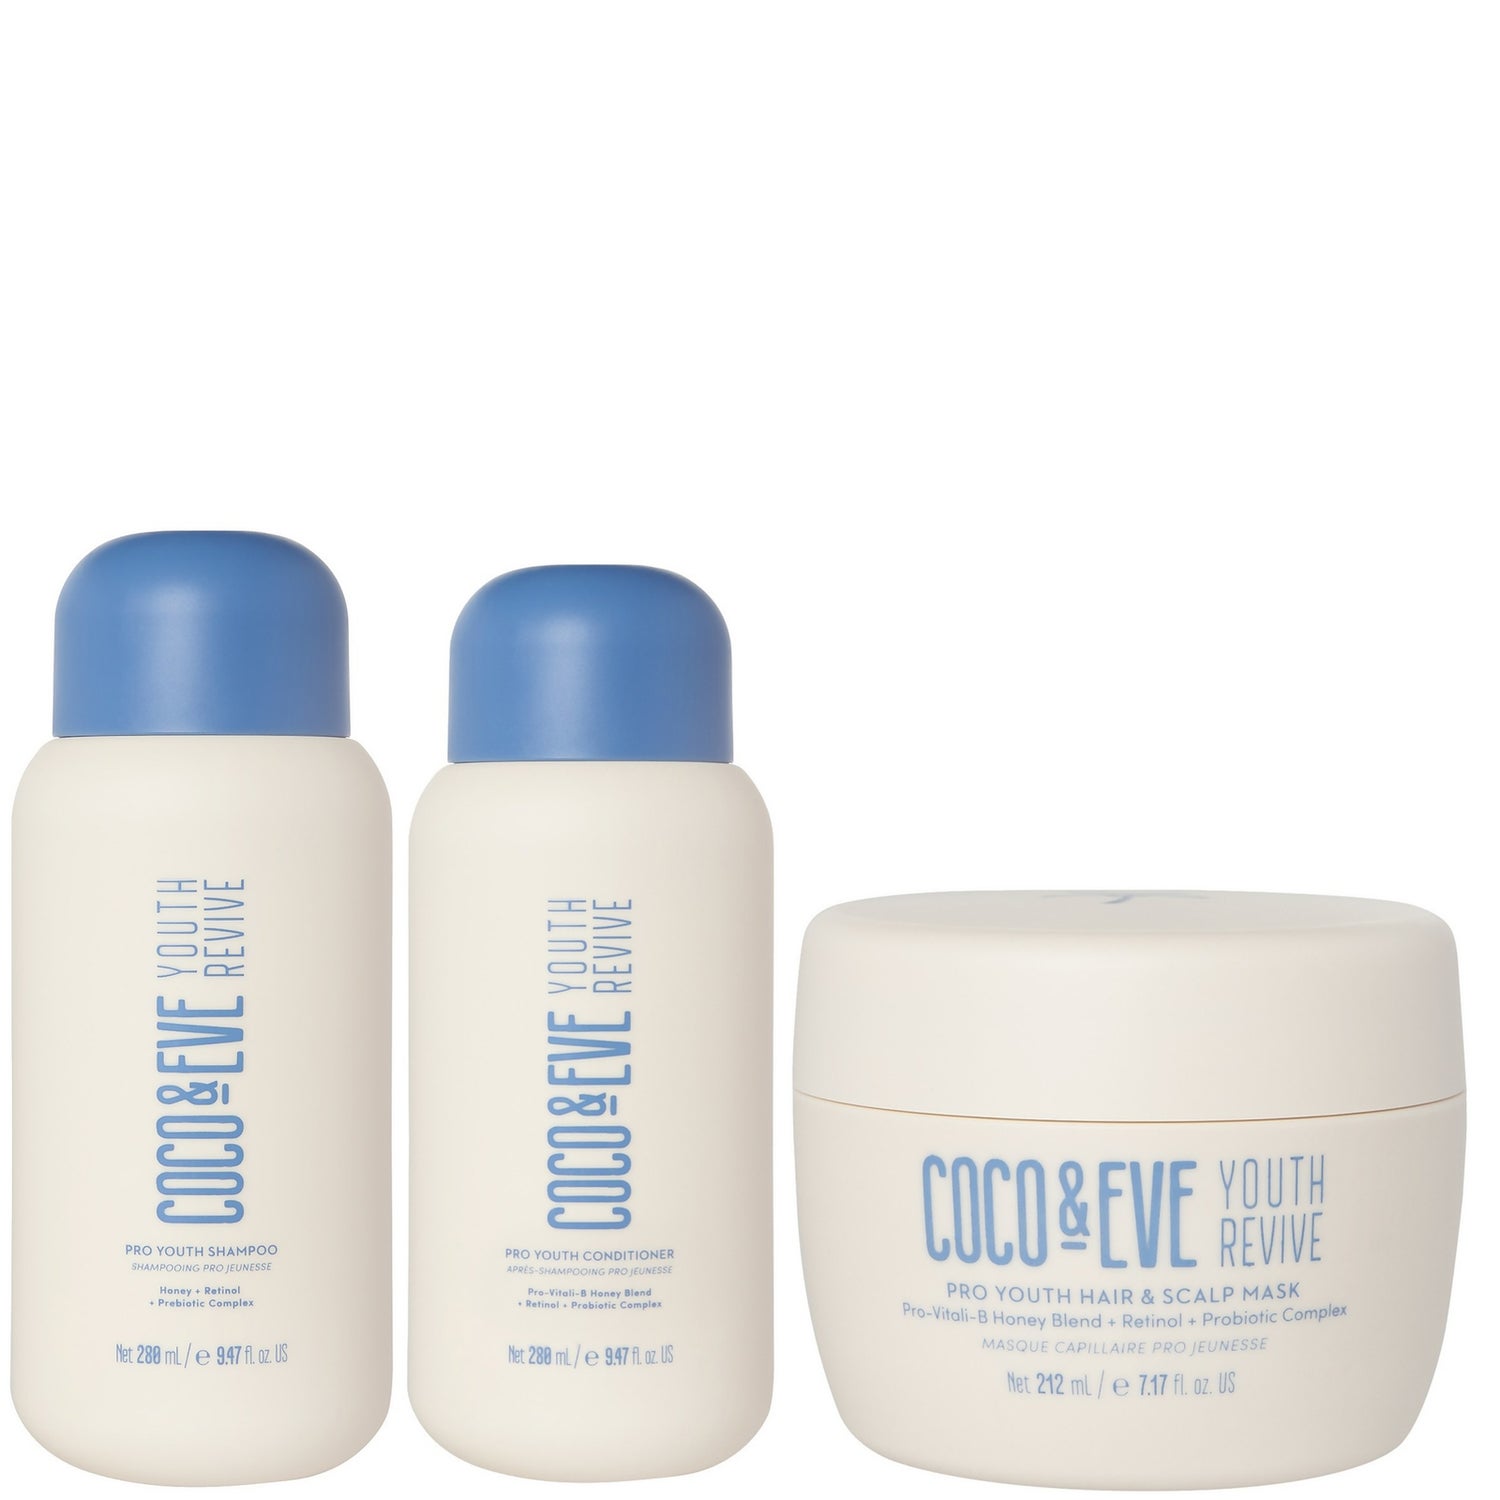 Coco & Eve Pro Youth Routine Bundle